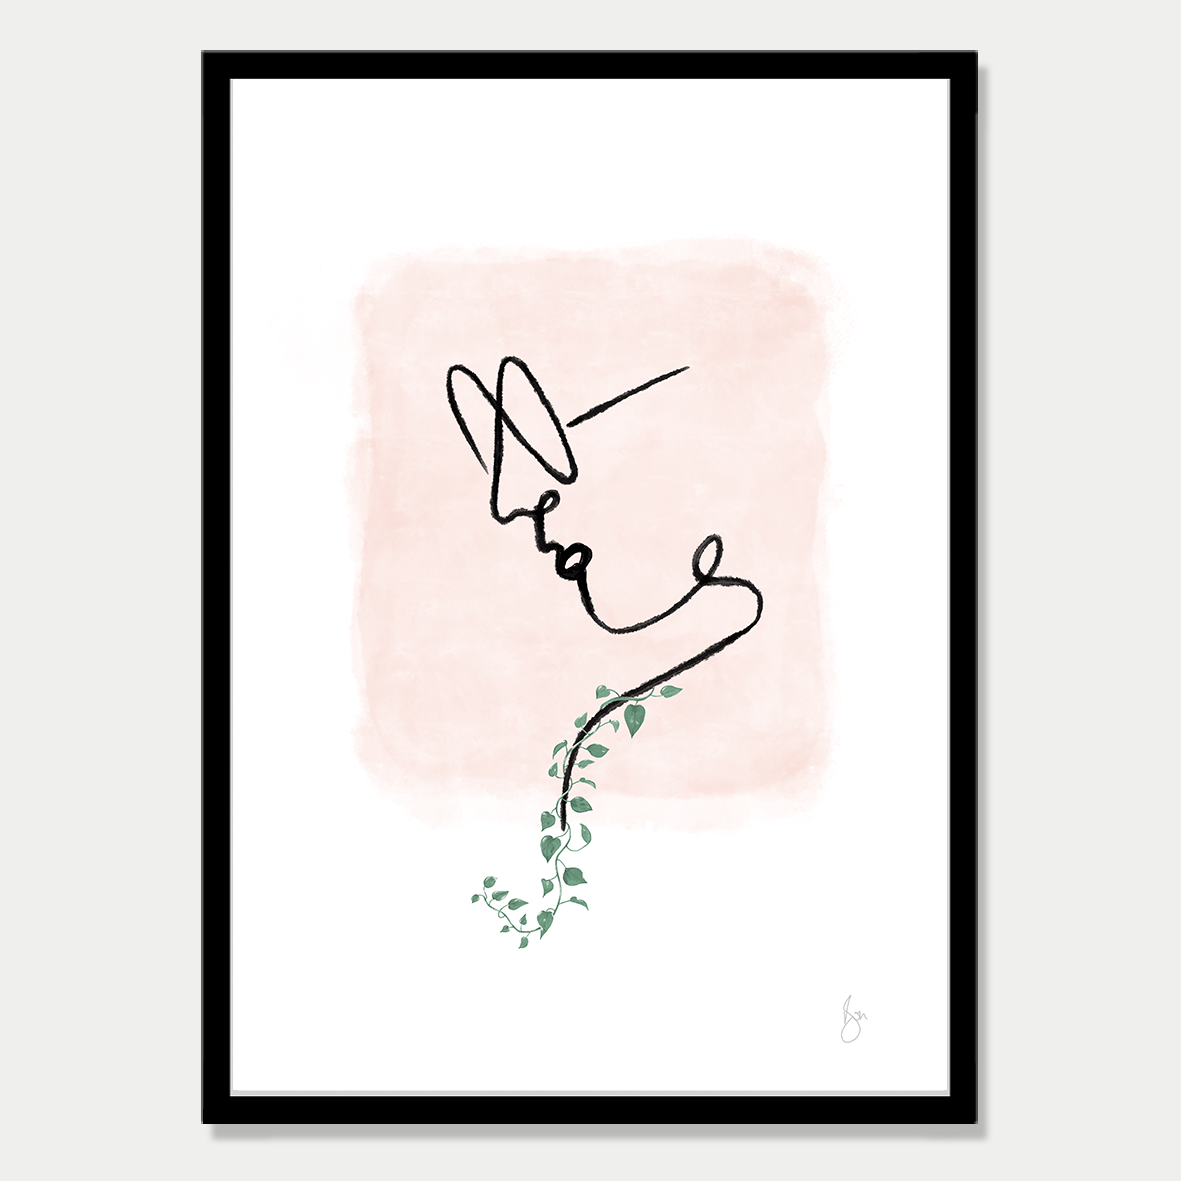 This art print is a line drawing on a woman wearing large glasses and has a single vine growing from her shoulder, by Bon Jung. Printed in New Zealand by endemicworld and framed in black.